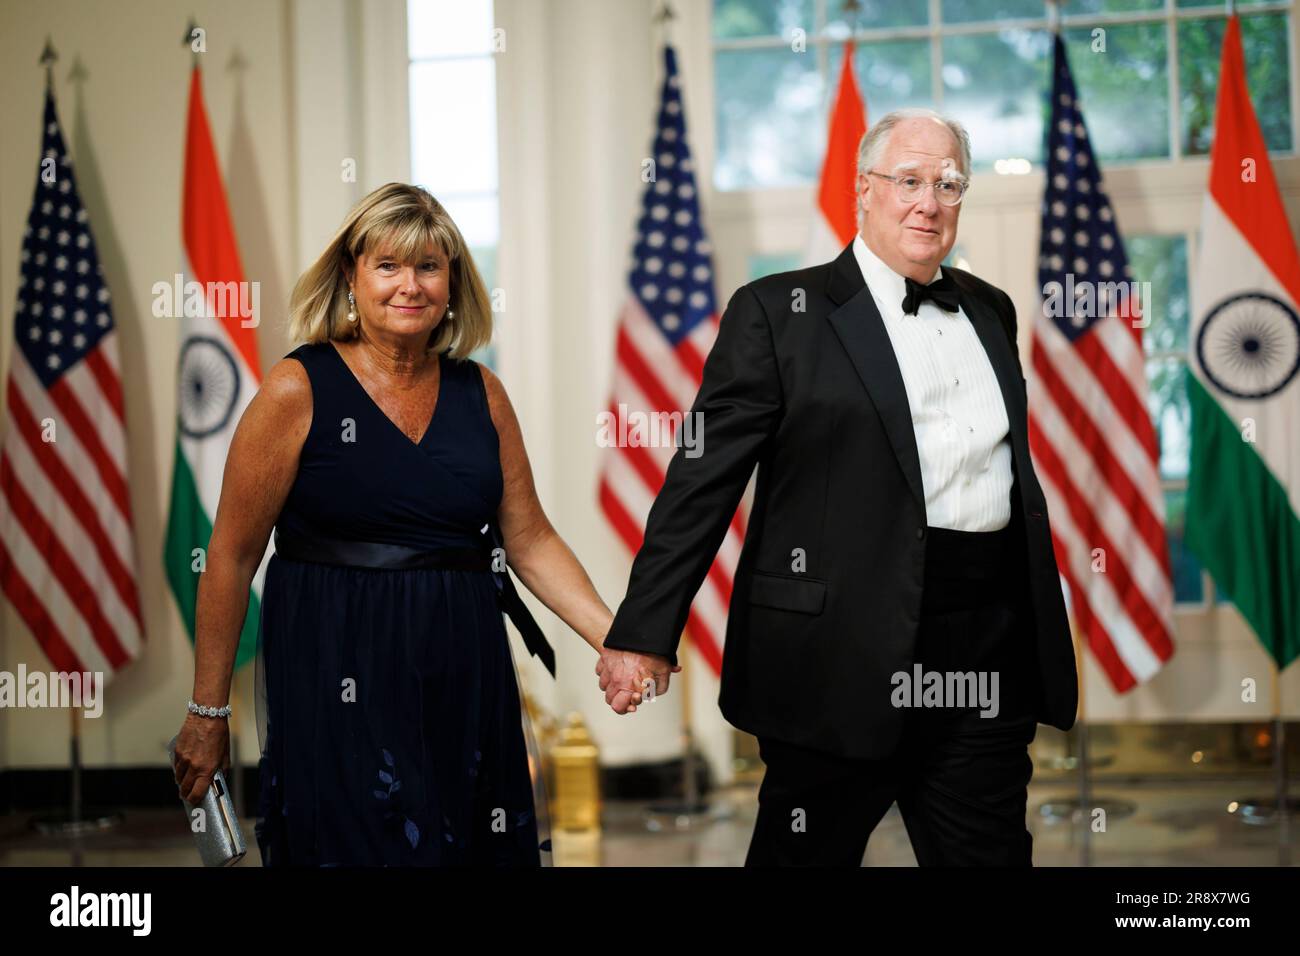 Michael C. Donilon, right, Assistant to the President and Senior Advisor to the President, and Patricia Donilon, arrive to attend a state dinner in honor of Indian Prime Minister Narendra Modi hosted by US President Joe Biden and First Lady Jill Biden at the White House in Washington, DC, US, on Thursday, June 22, 2023. Biden and Modi announced a series of defense and commercial deals designed to improve military and economic ties between their nations during a state visit at the White House today. Photographer: Ting Shen/Pool/Sipa USA Stock Photo